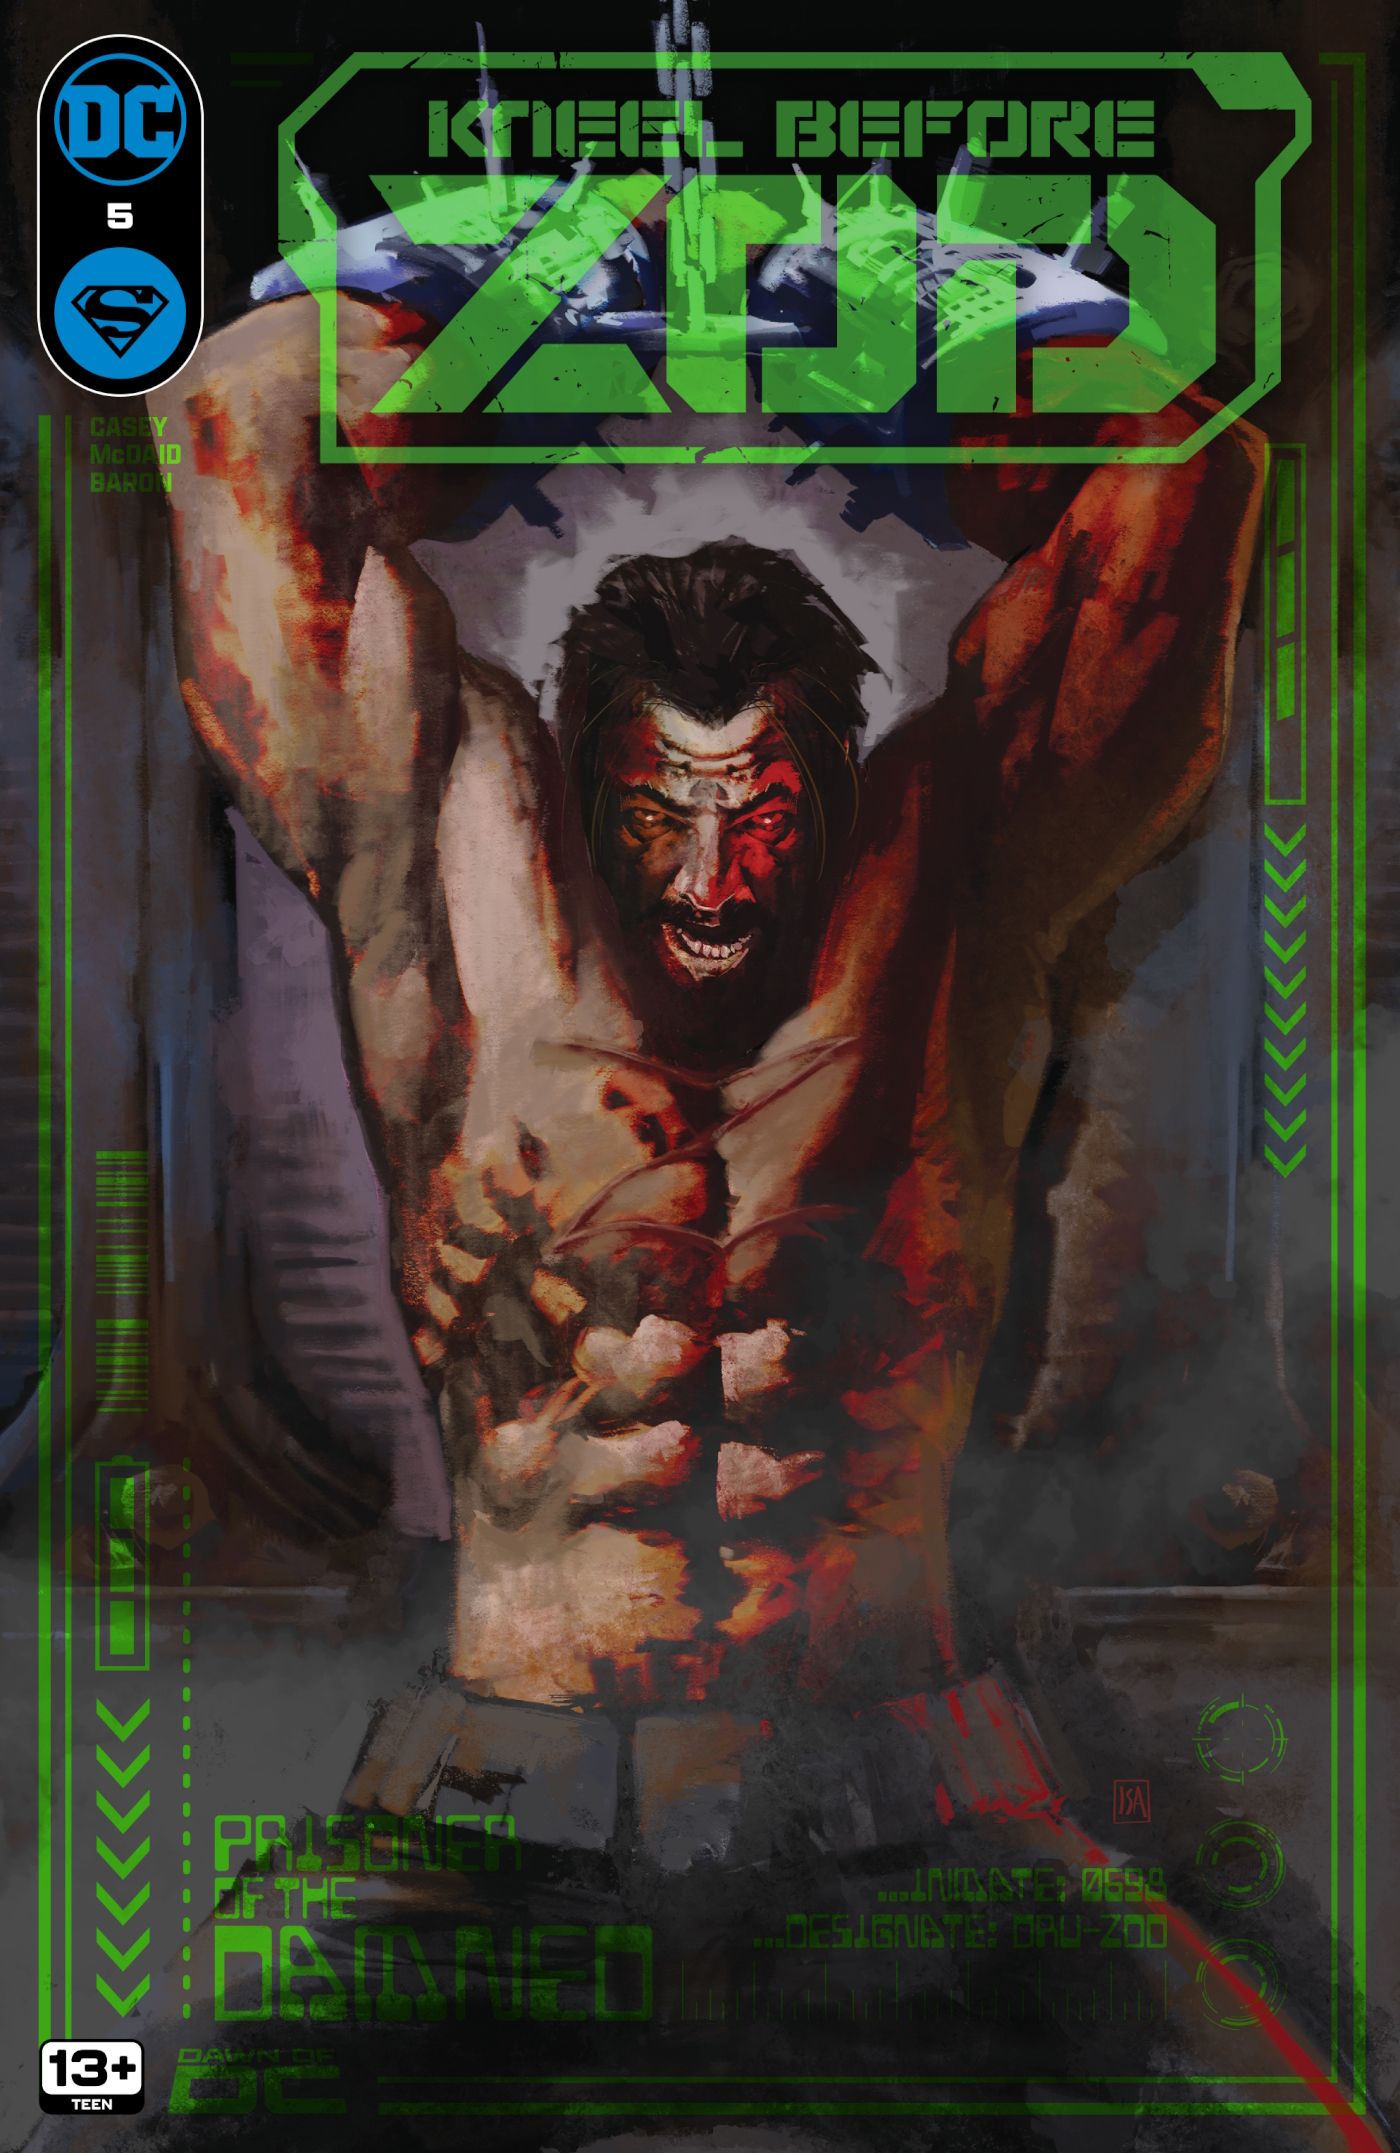 Kneel Before Zod 5 Main Cover: Shirtless General Zod in high tech chains.